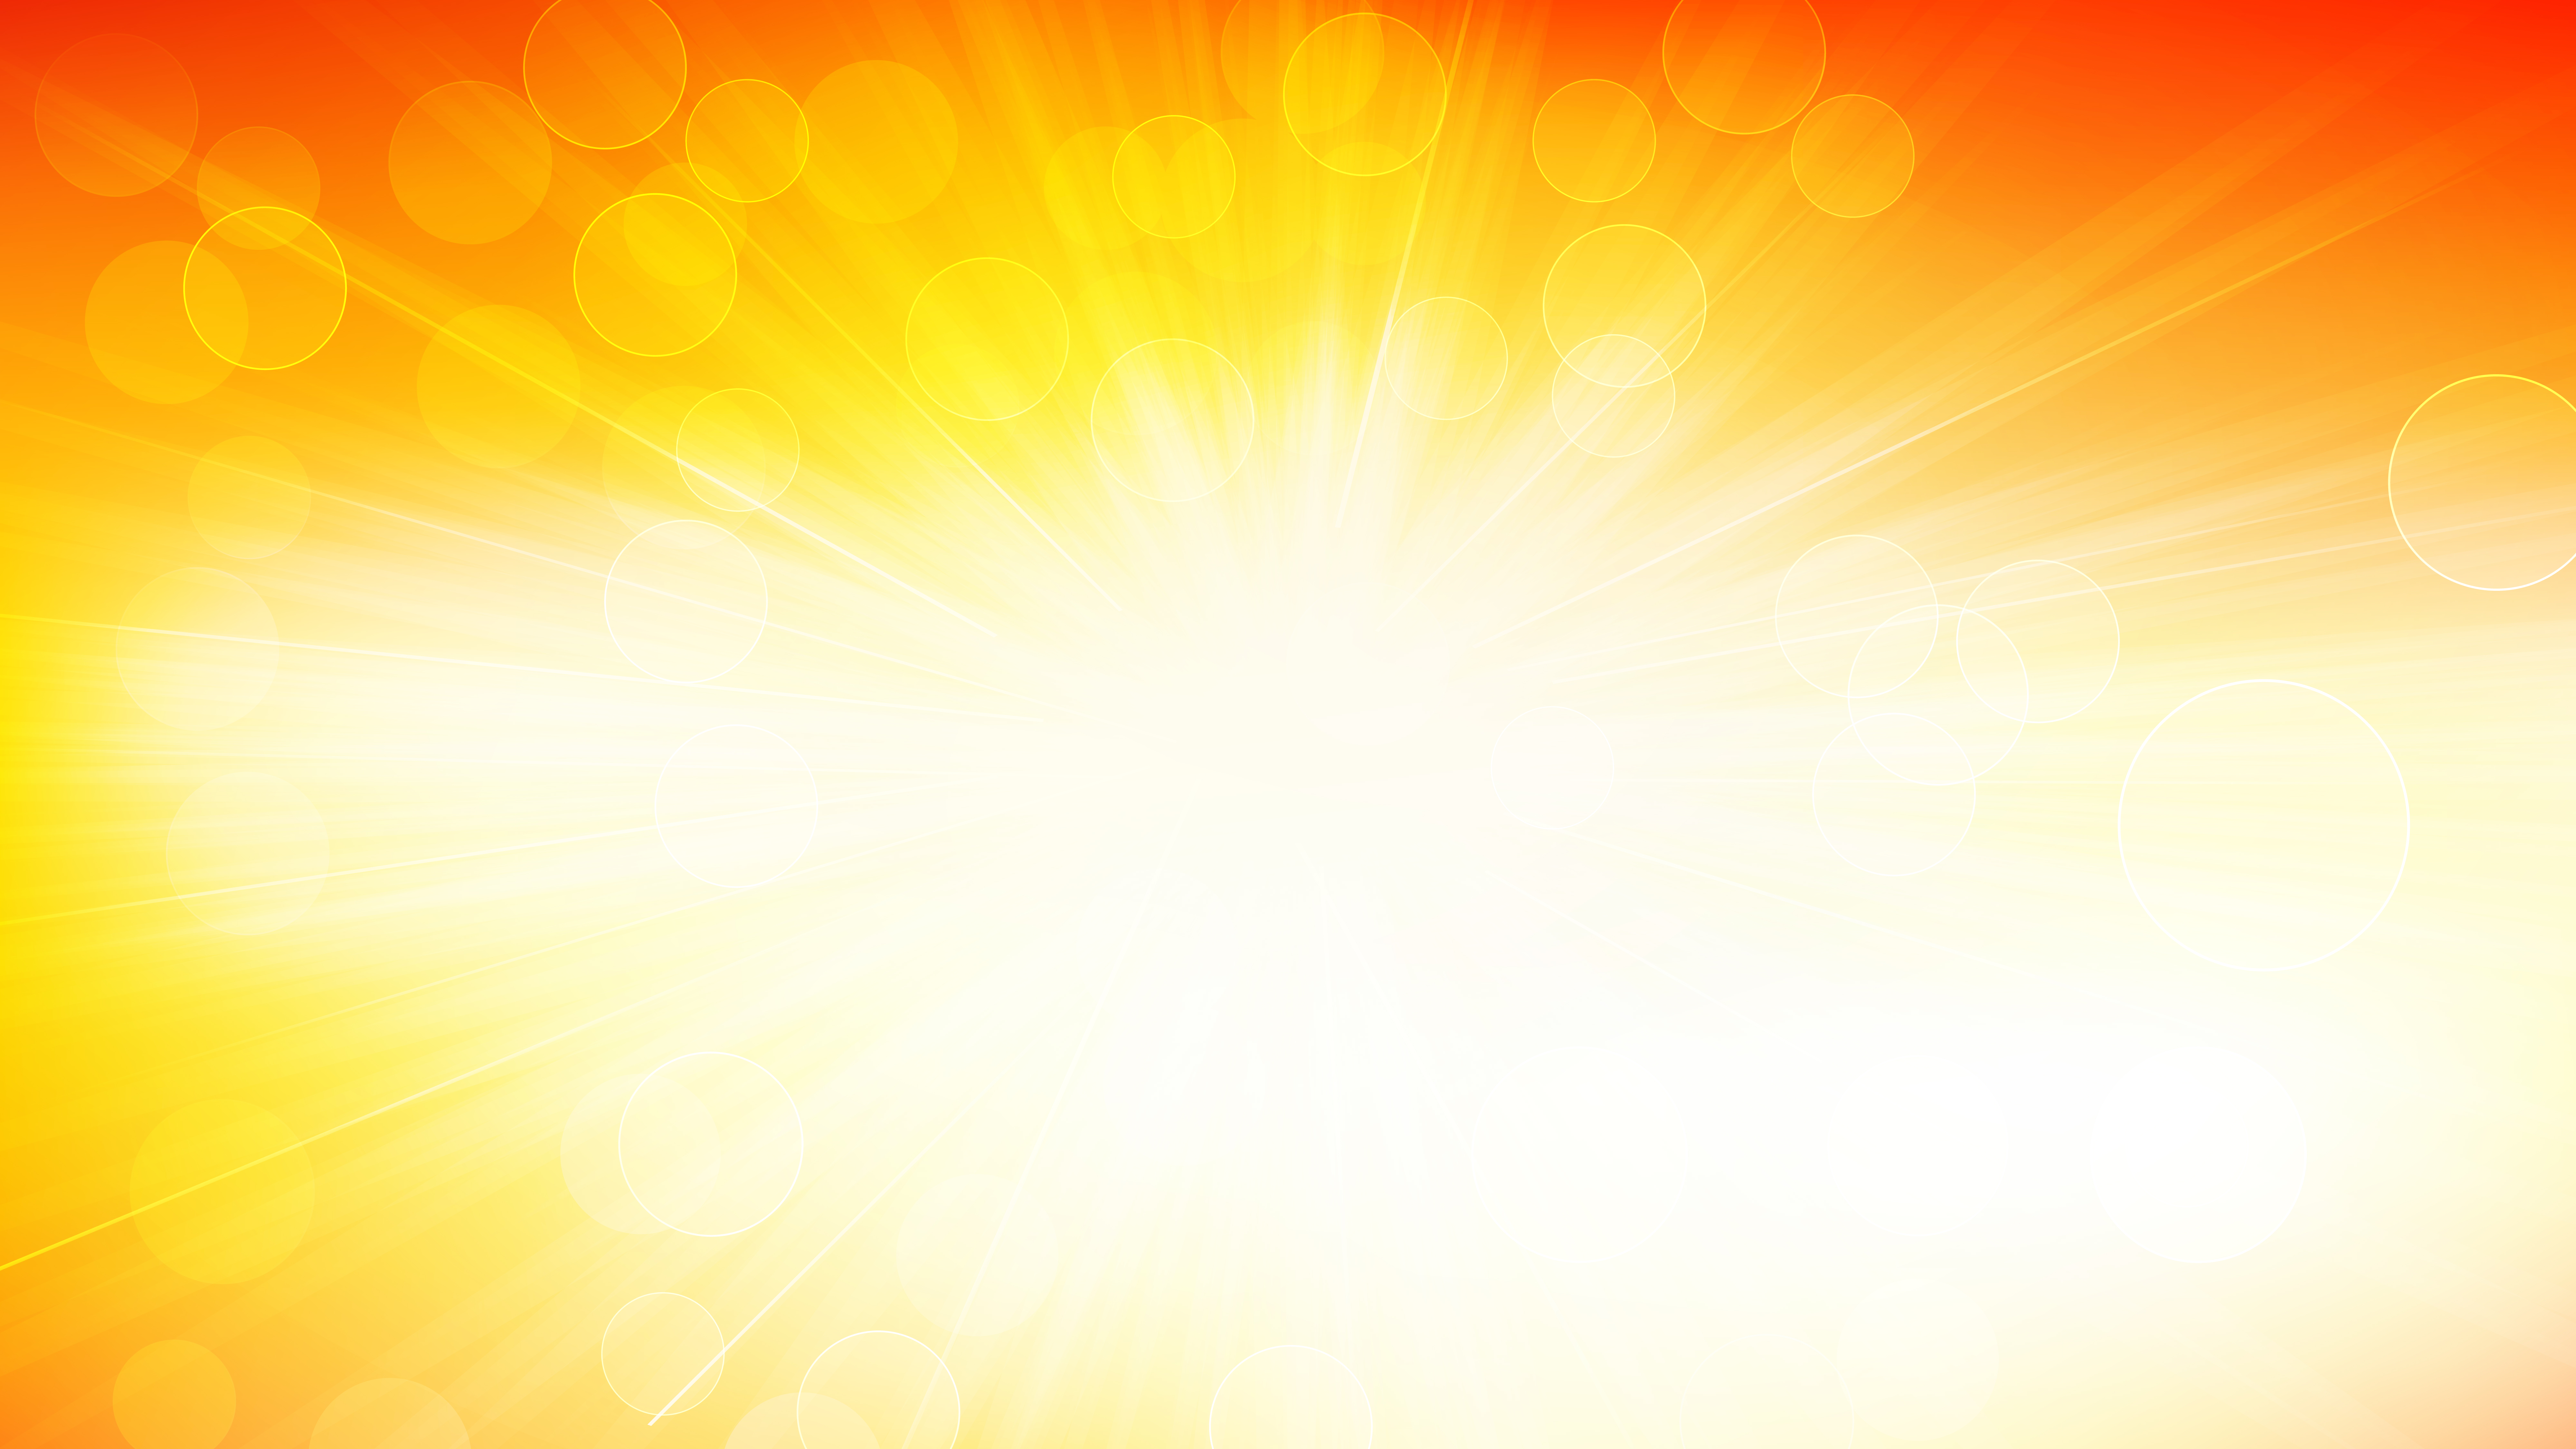 Free Abstract Orange and White Defocused Lights with Sun Rays Background  Illustration